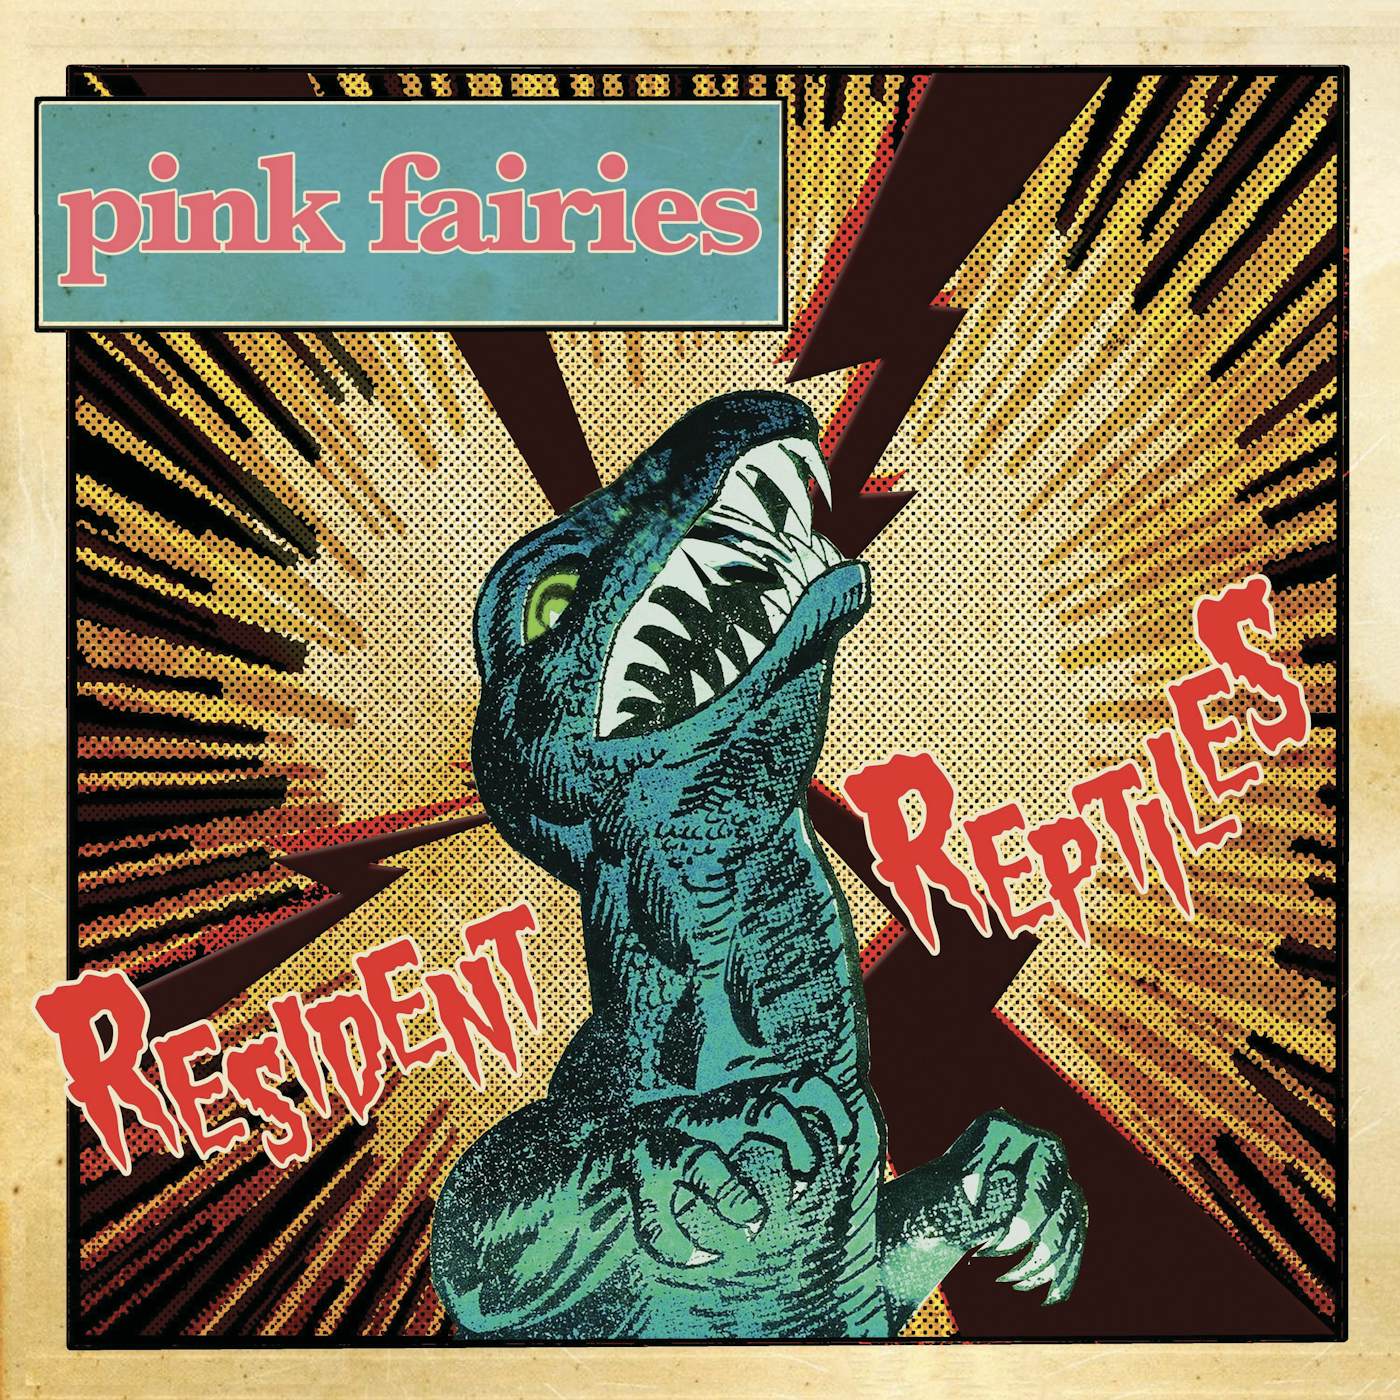 The Pink Fairies RESIDENT REPTILES CD